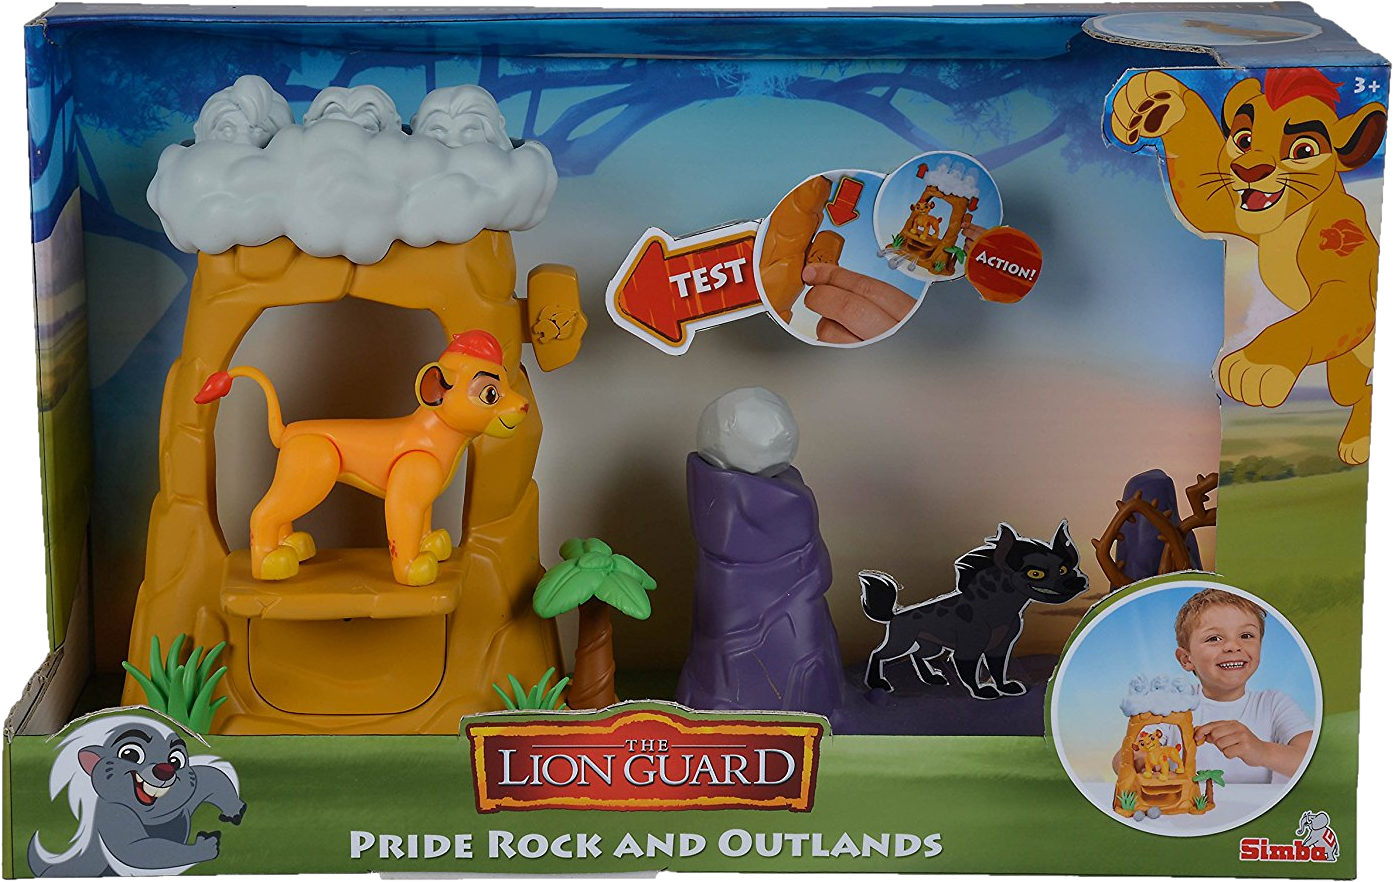 the lion king playset